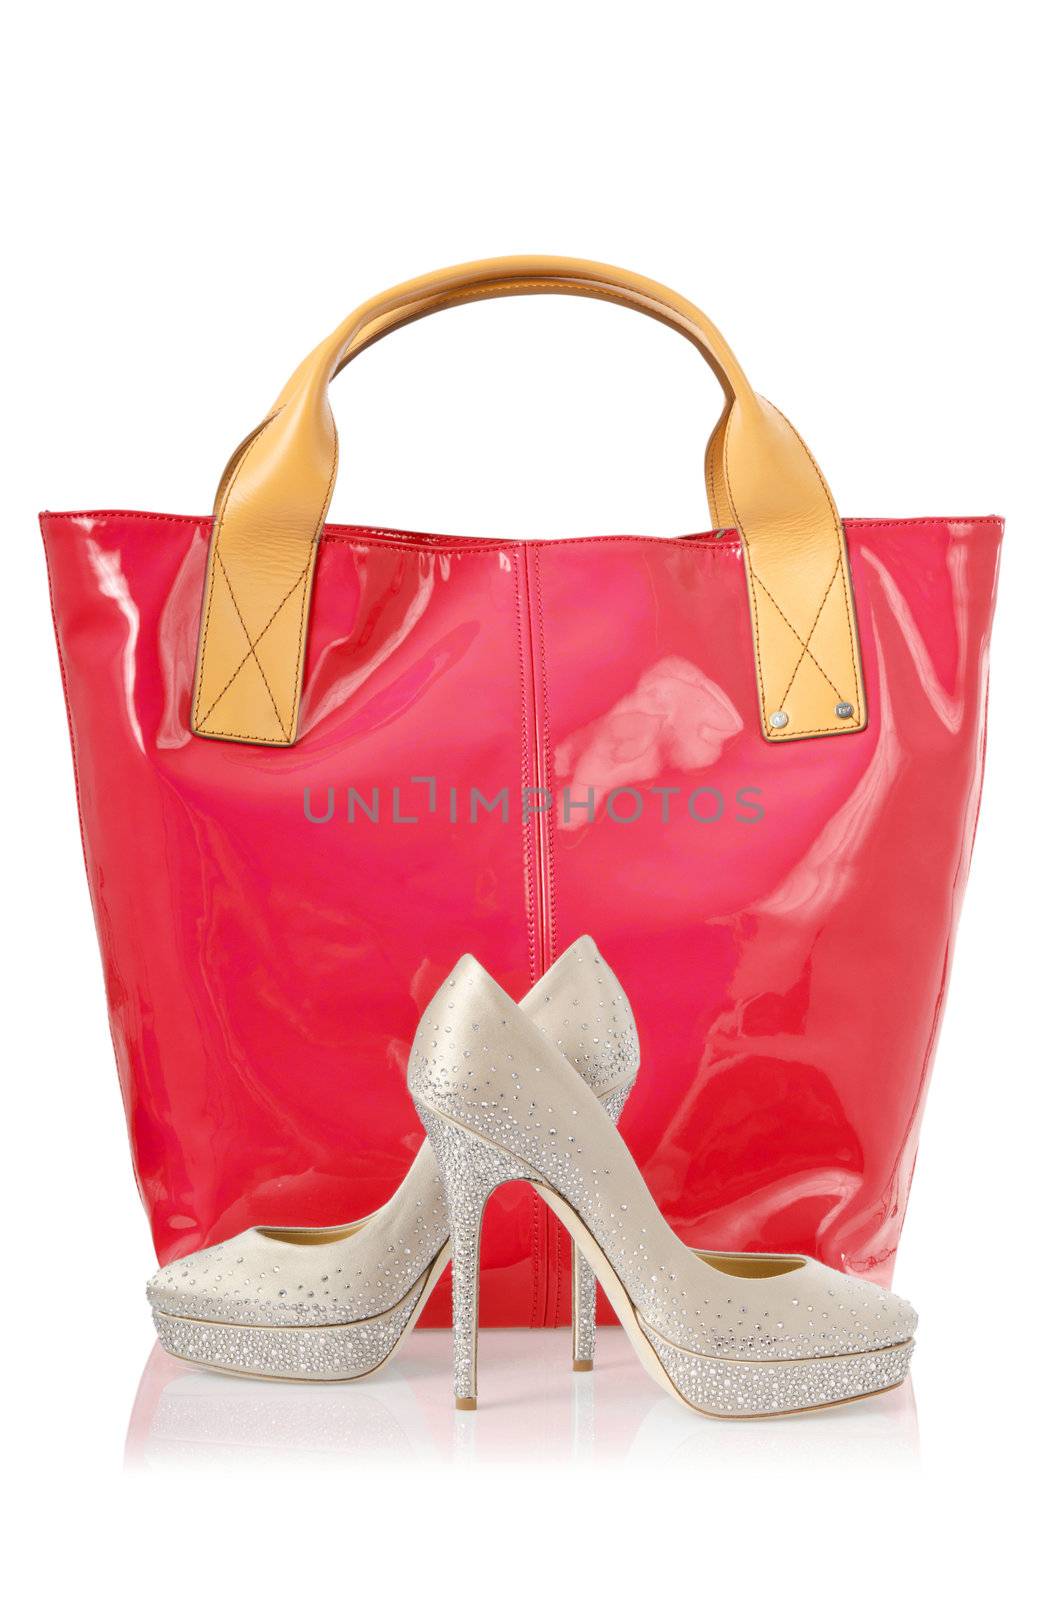 Elegant bag and shoes on white by Elnur